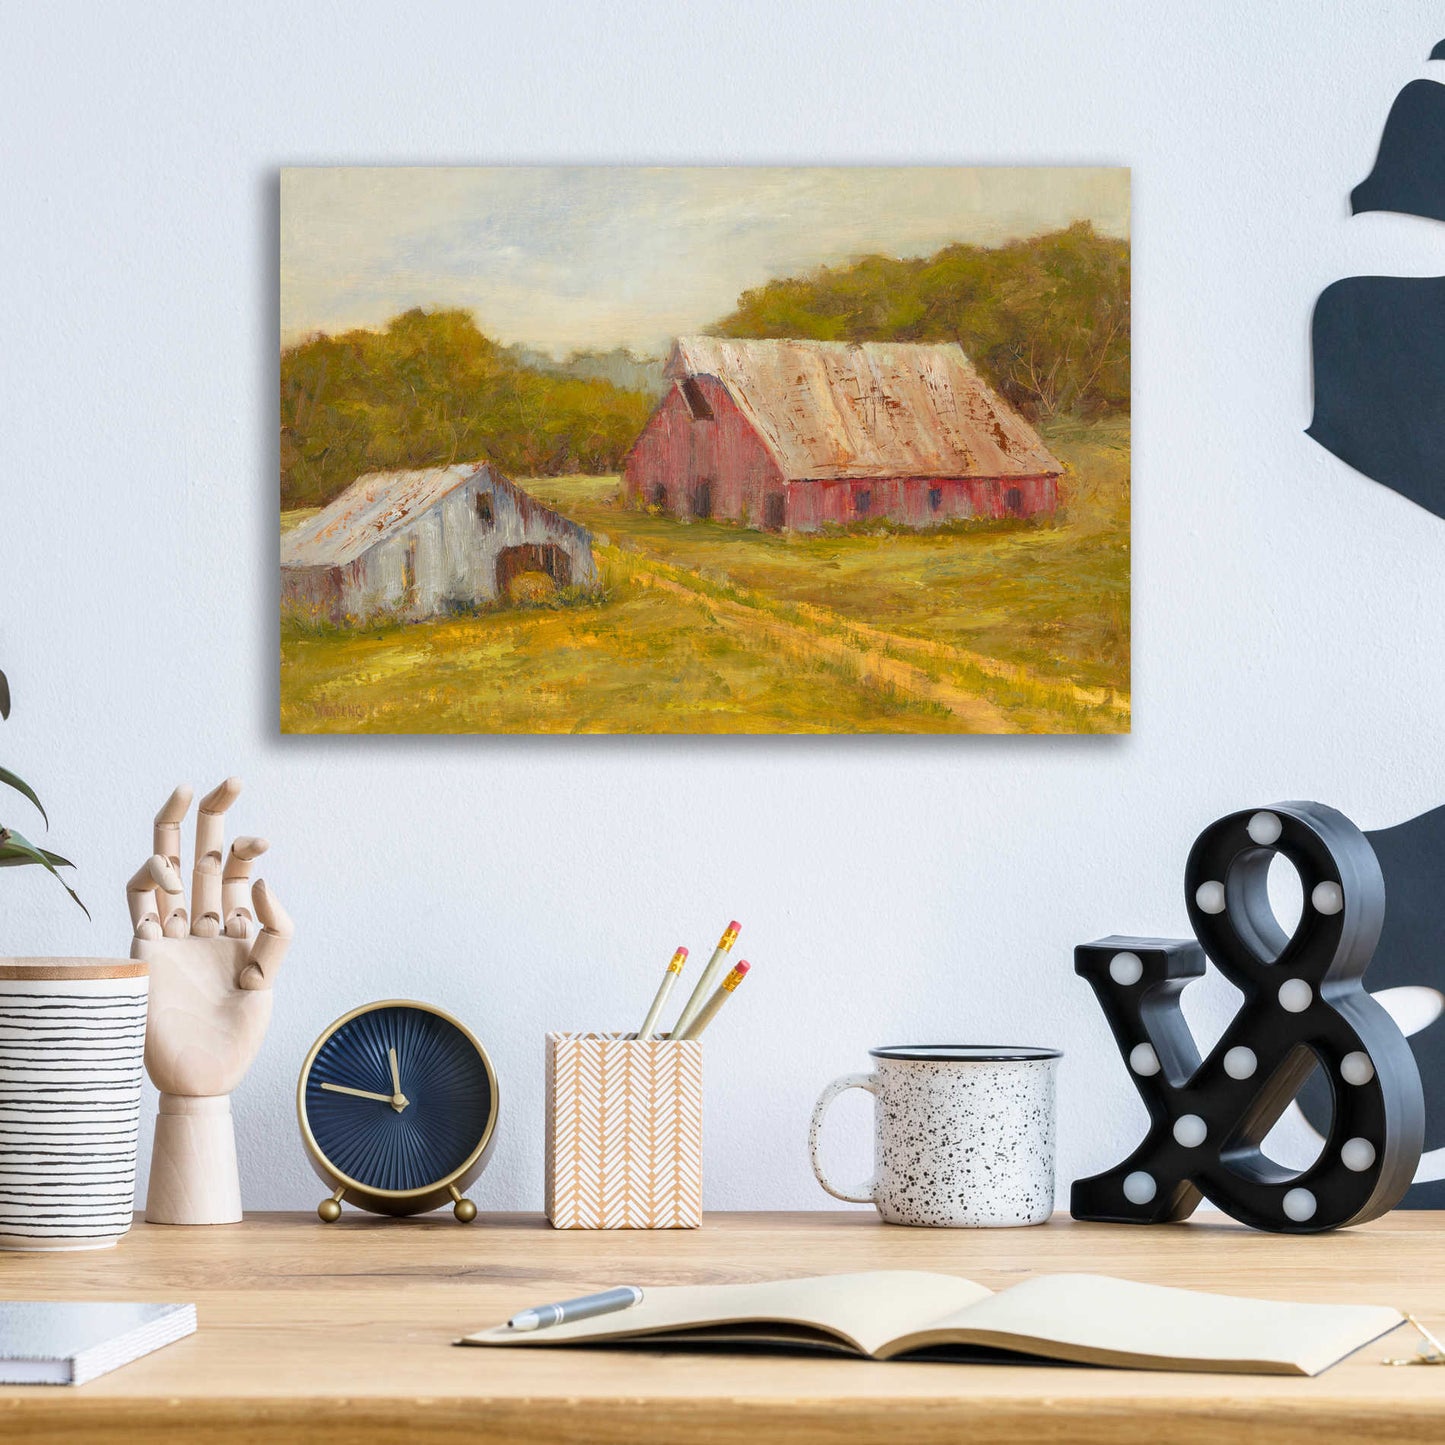 Epic Art 'Country Barns' by Marilyn Wendling, Acrylic Glass Wall Art,16x12